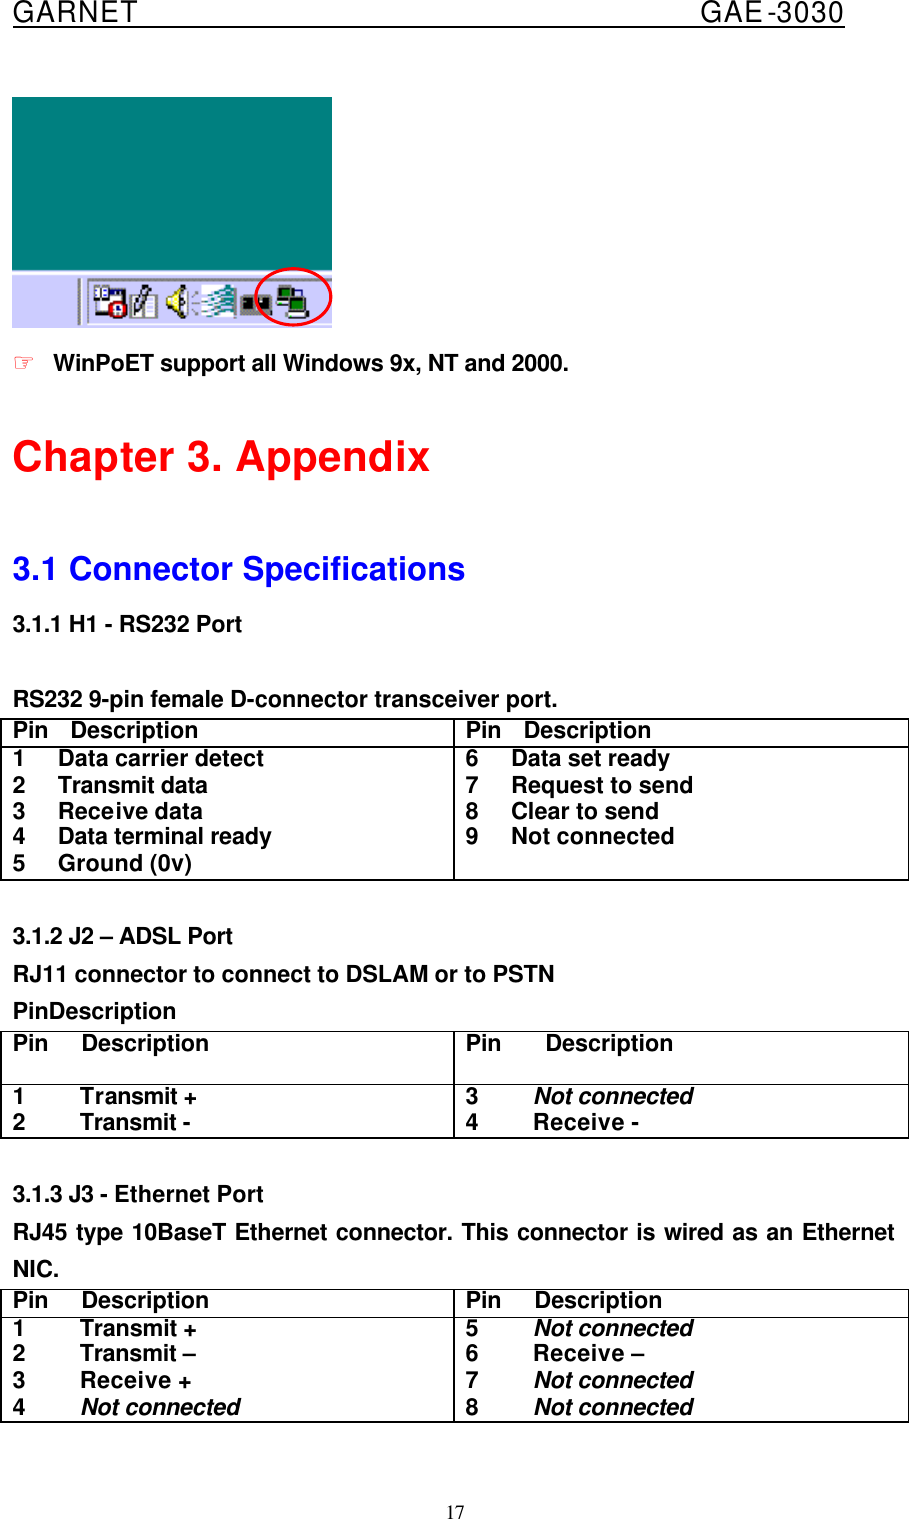  GARNET                                        GAE-3030 17  ☞ WinPoET support all Windows 9x, NT and 2000.    Chapter 3. Appendix  3.1 Connector Specifications 3.1.1 H1 - RS232 Port  RS232 9-pin female D-connector transceiver port. Pin  Description Pin  Description 1   Data carrier detect 2   Transmit data 3   Receive data 4   Data terminal ready 5   Ground (0v) 6   Data set ready 7   Request to send 8   Clear to send 9   Not connected  3.1.2 J2 – ADSL Port RJ11 connector to connect to DSLAM or to PSTN PinDescription Pin   Description  Pin    Description 1     Transmit + 2     Transmit - 3     Not connected 4     Receive -  3.1.3 J3 - Ethernet Port RJ45 type 10BaseT Ethernet connector. This connector is wired as an Ethernet NIC. Pin   Description Pin   Description 1     Transmit + 2     Transmit – 3     Receive + 4     Not connected 5     Not connected 6     Receive –   7     Not connected 8     Not connected 